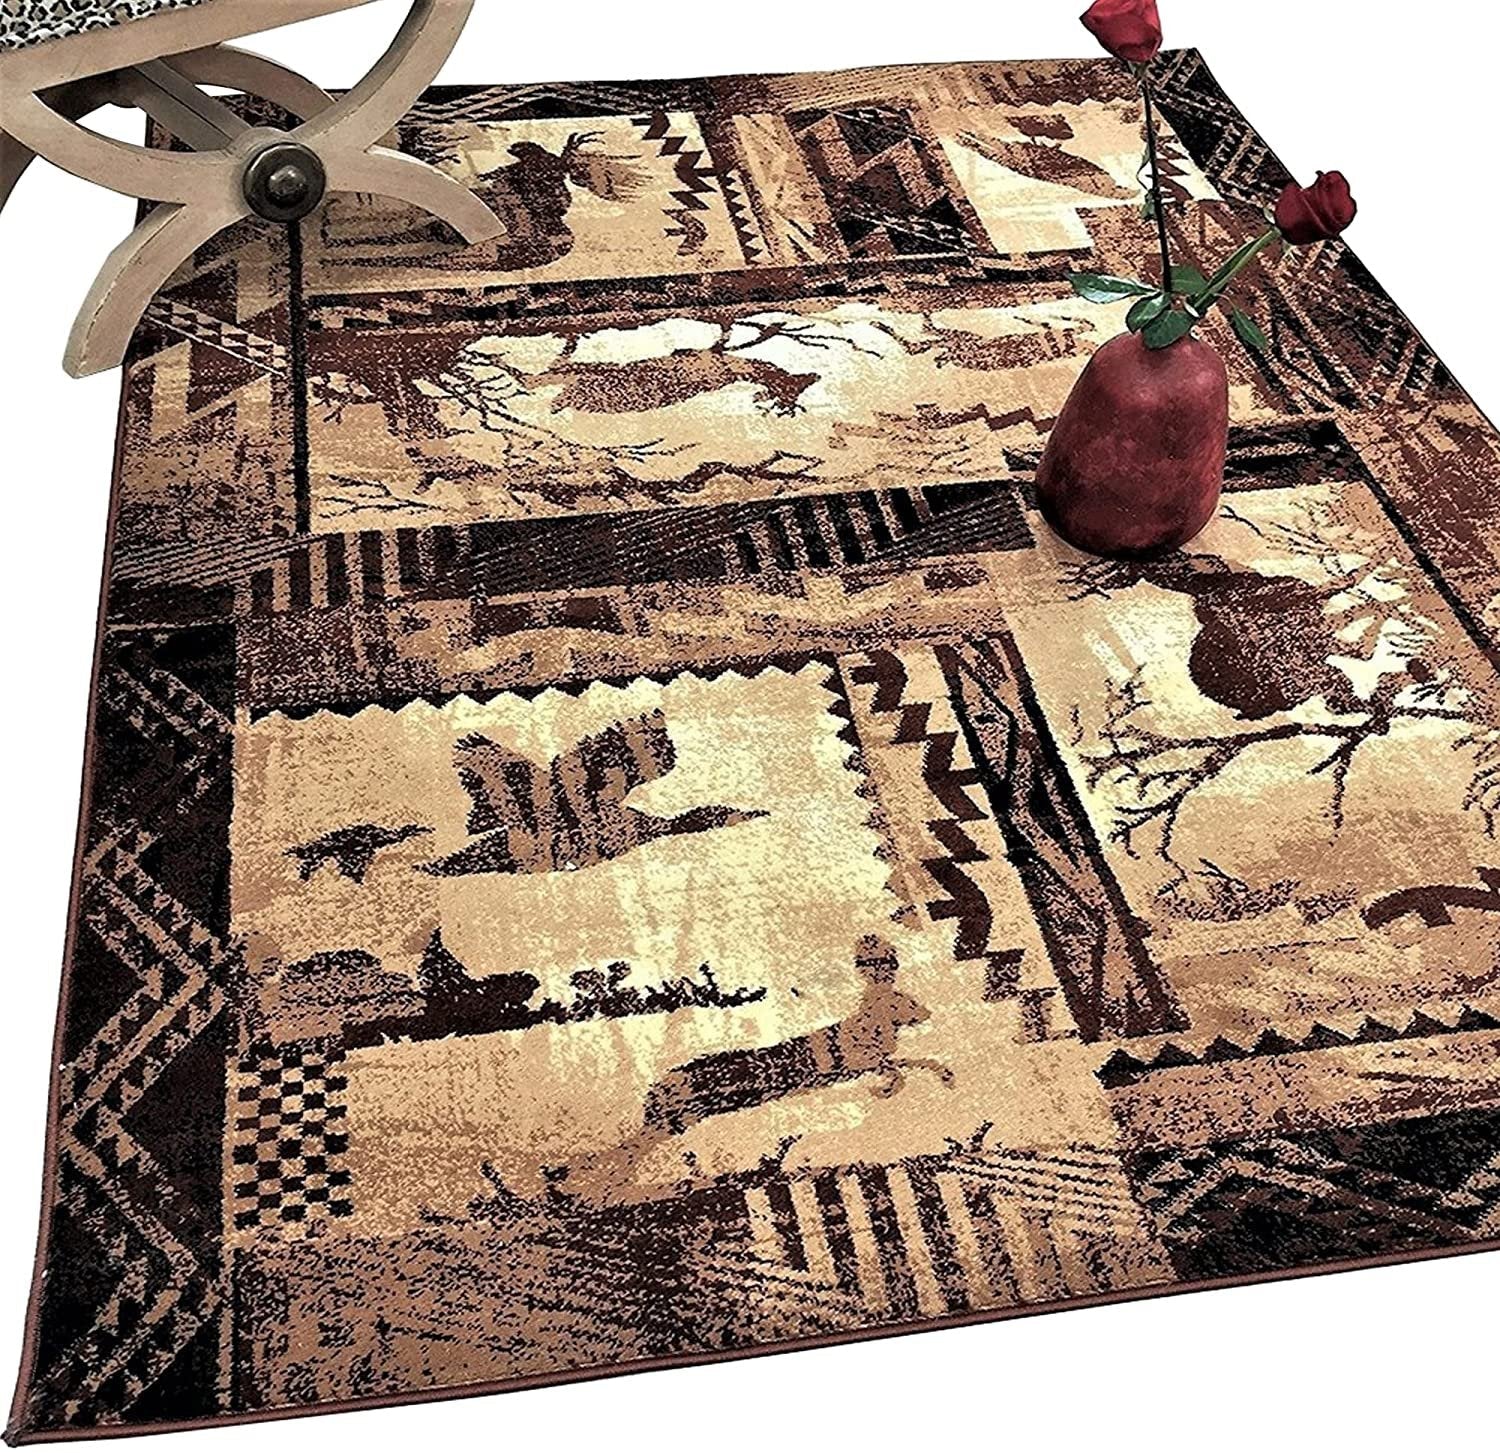 Lodge Cabin Nature and Animals Area Rug Nature Pattern Cabin Area Rugâ€“Abstract, Chocolate Brown/Beige-Rabbit/Deer/Moose/Birds